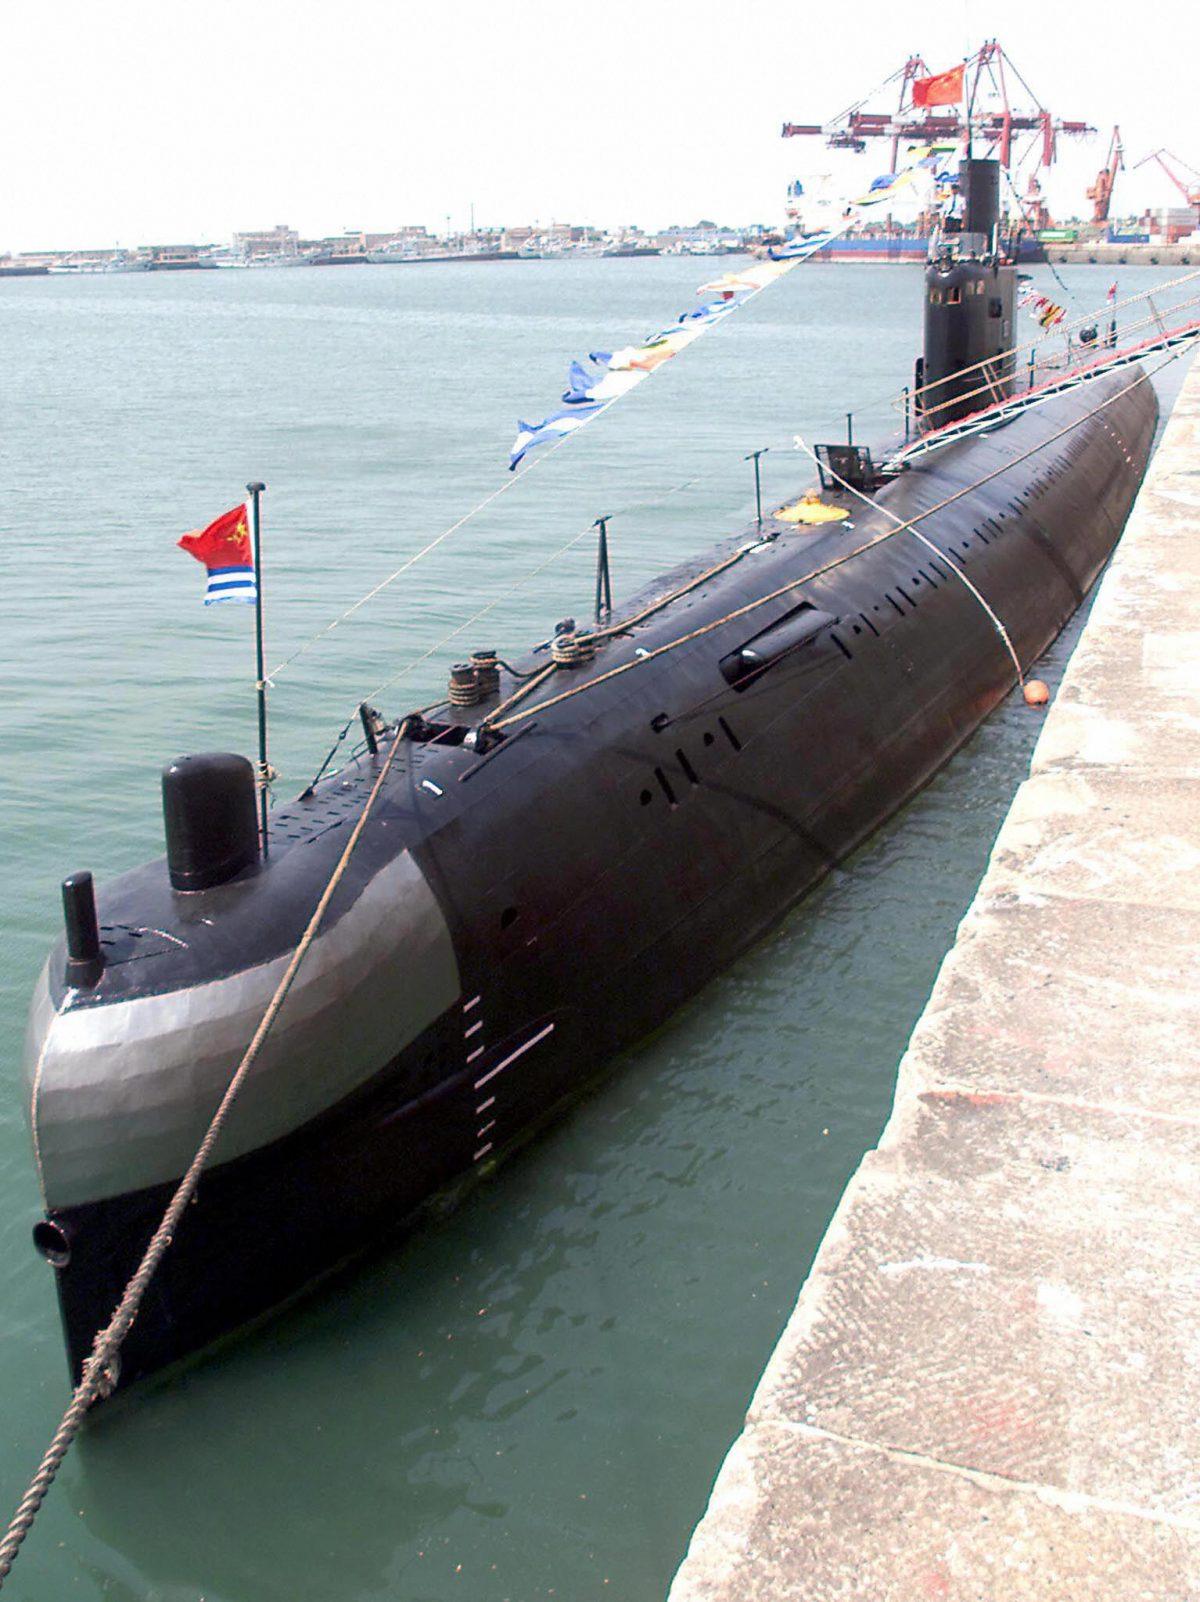 A Russian Kilo-class conventional submarine belonging to the Chinese People's Liberation Army Navy (PLAN) at the naval headquarters of the China North Sea Fleet in the eastern Chinese port city of Qingdao on Aug. 2, 2000. The Chinese military may have made significant progress on its new submarine fleet, given recent media reports. (Goh Chai Hin/AFP/Getty Images)